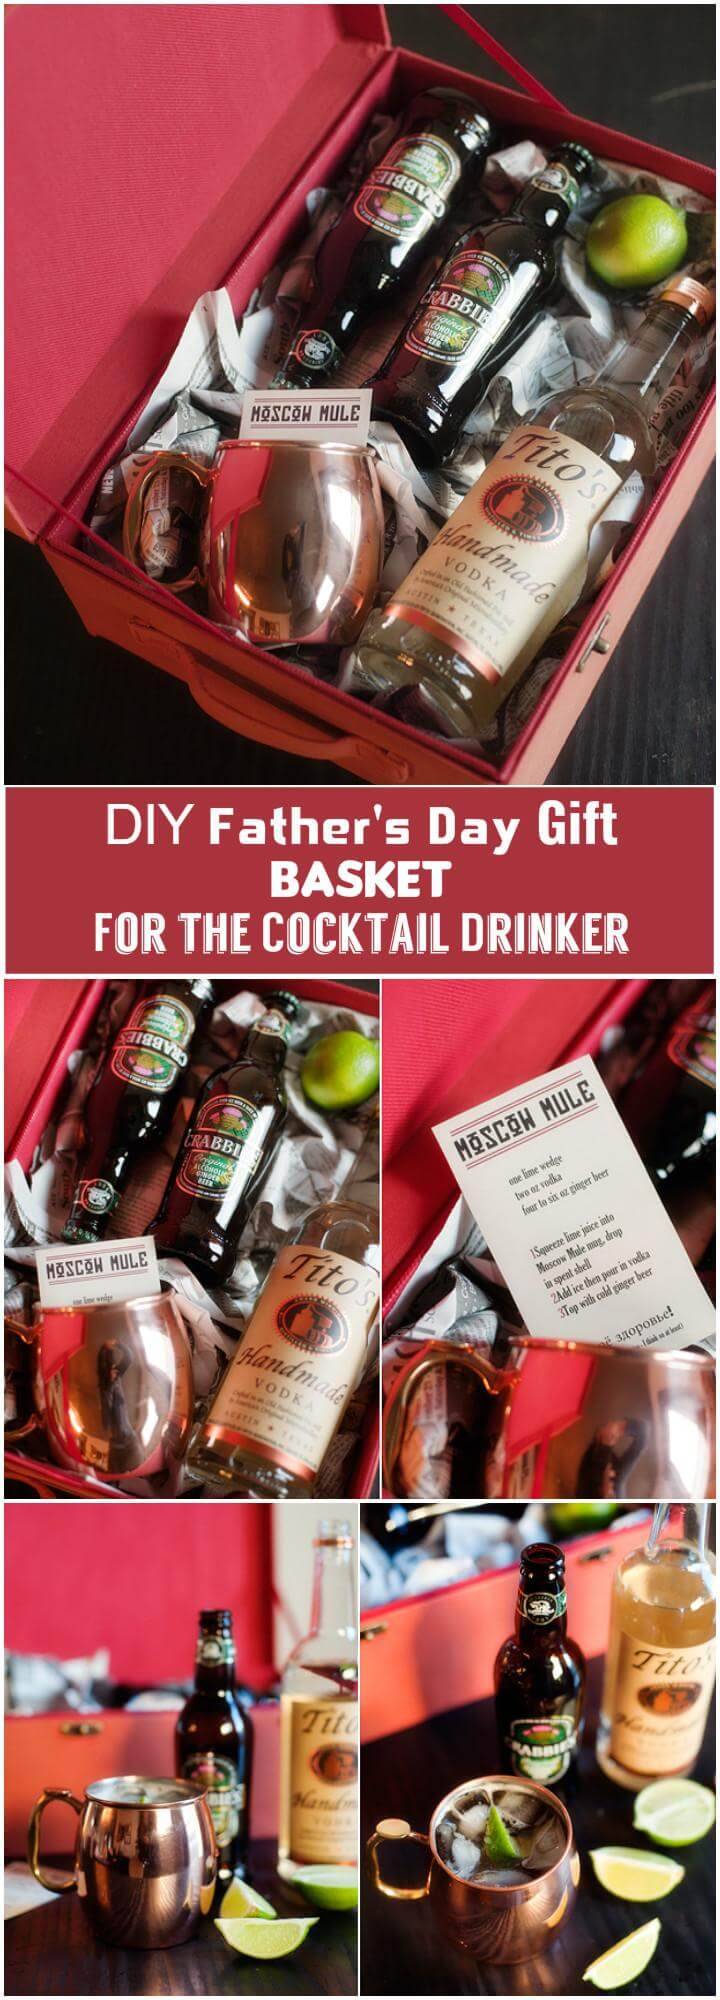 DIY Father's day gift basket